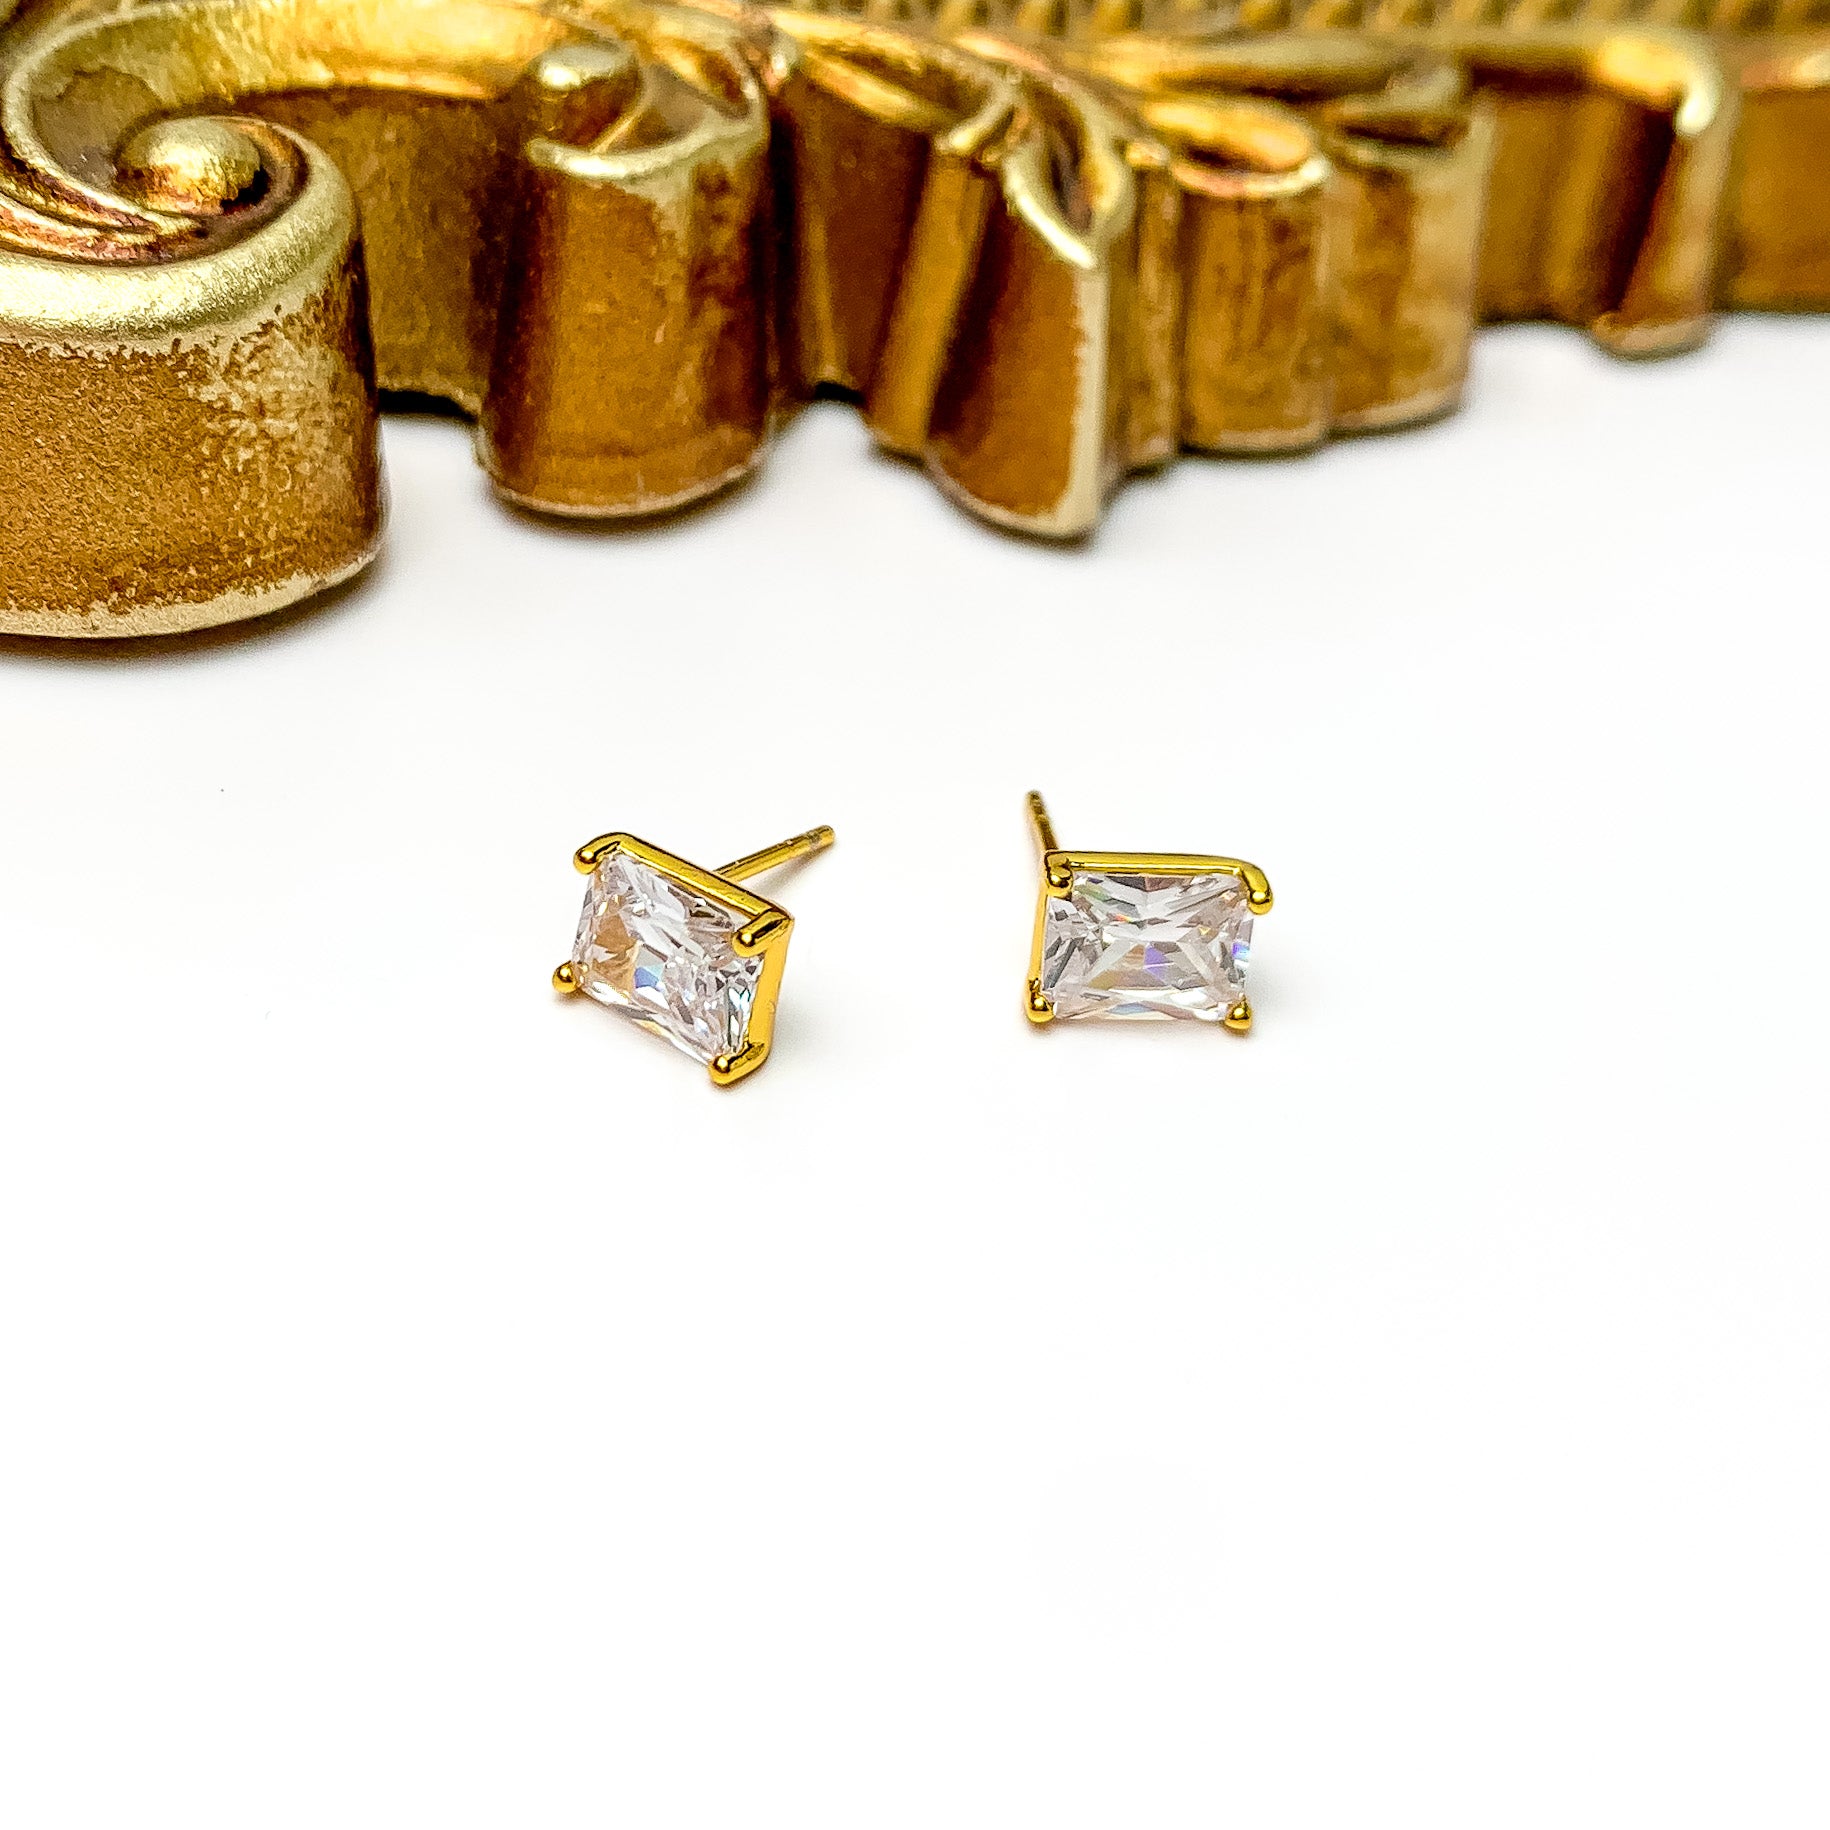 A pair of rectangle, clear crystal stud earrings with a gold setting. These earrings are pictured on a white background with a gold material at the top of the picture. 